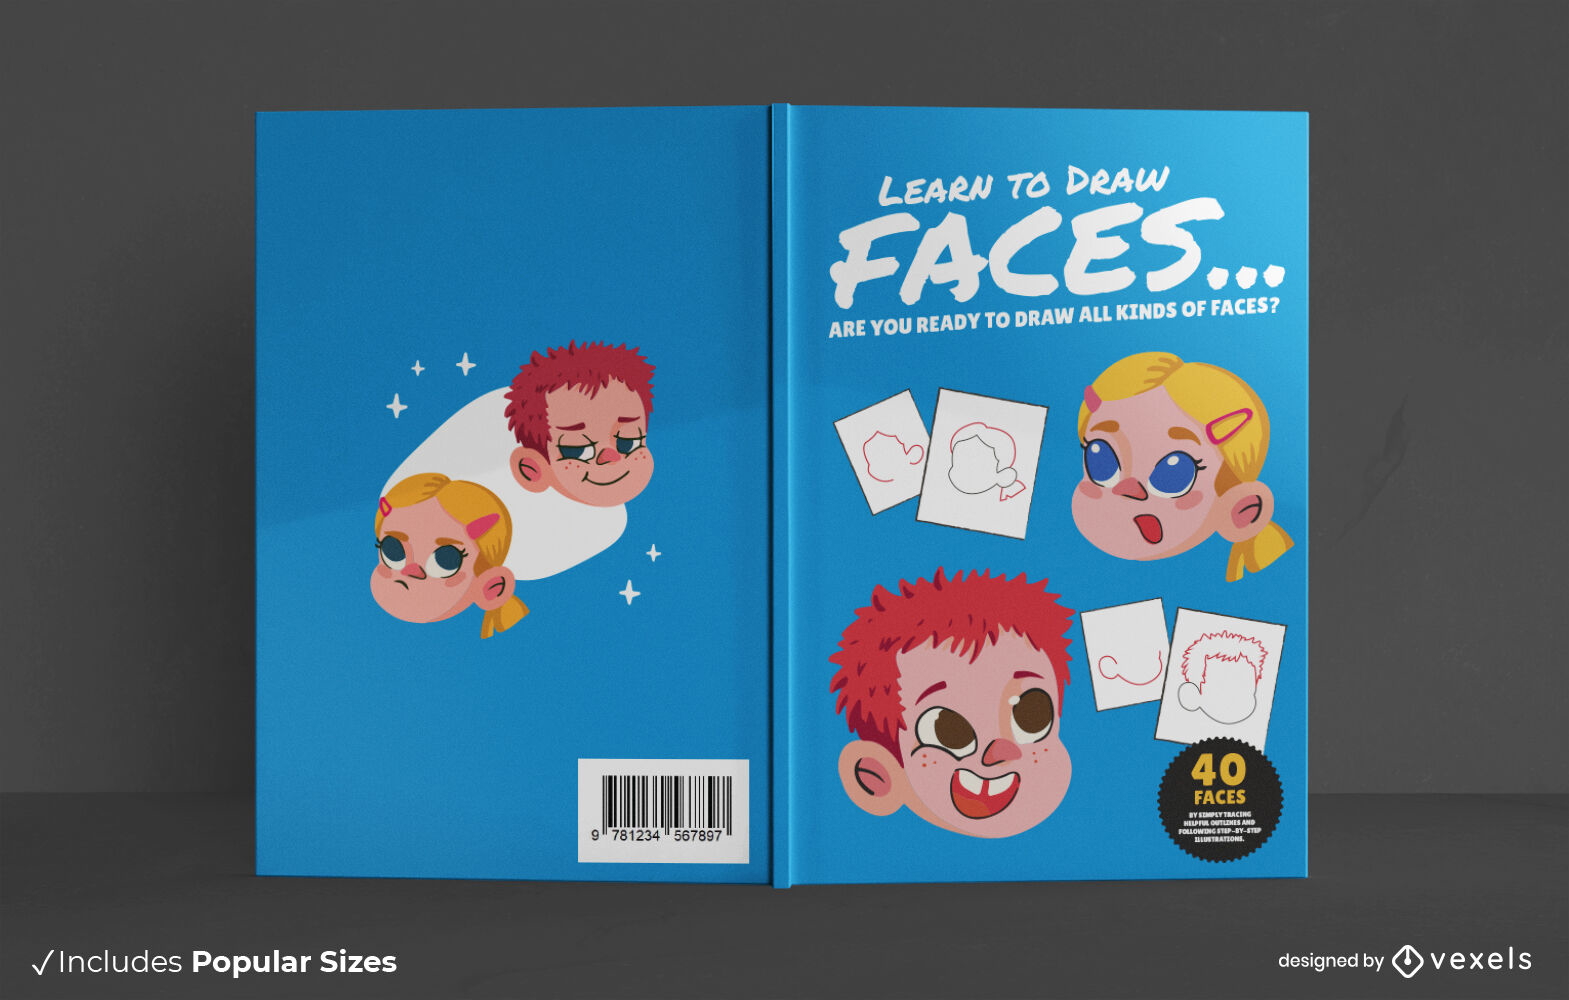 How-to-draw faces book cover design